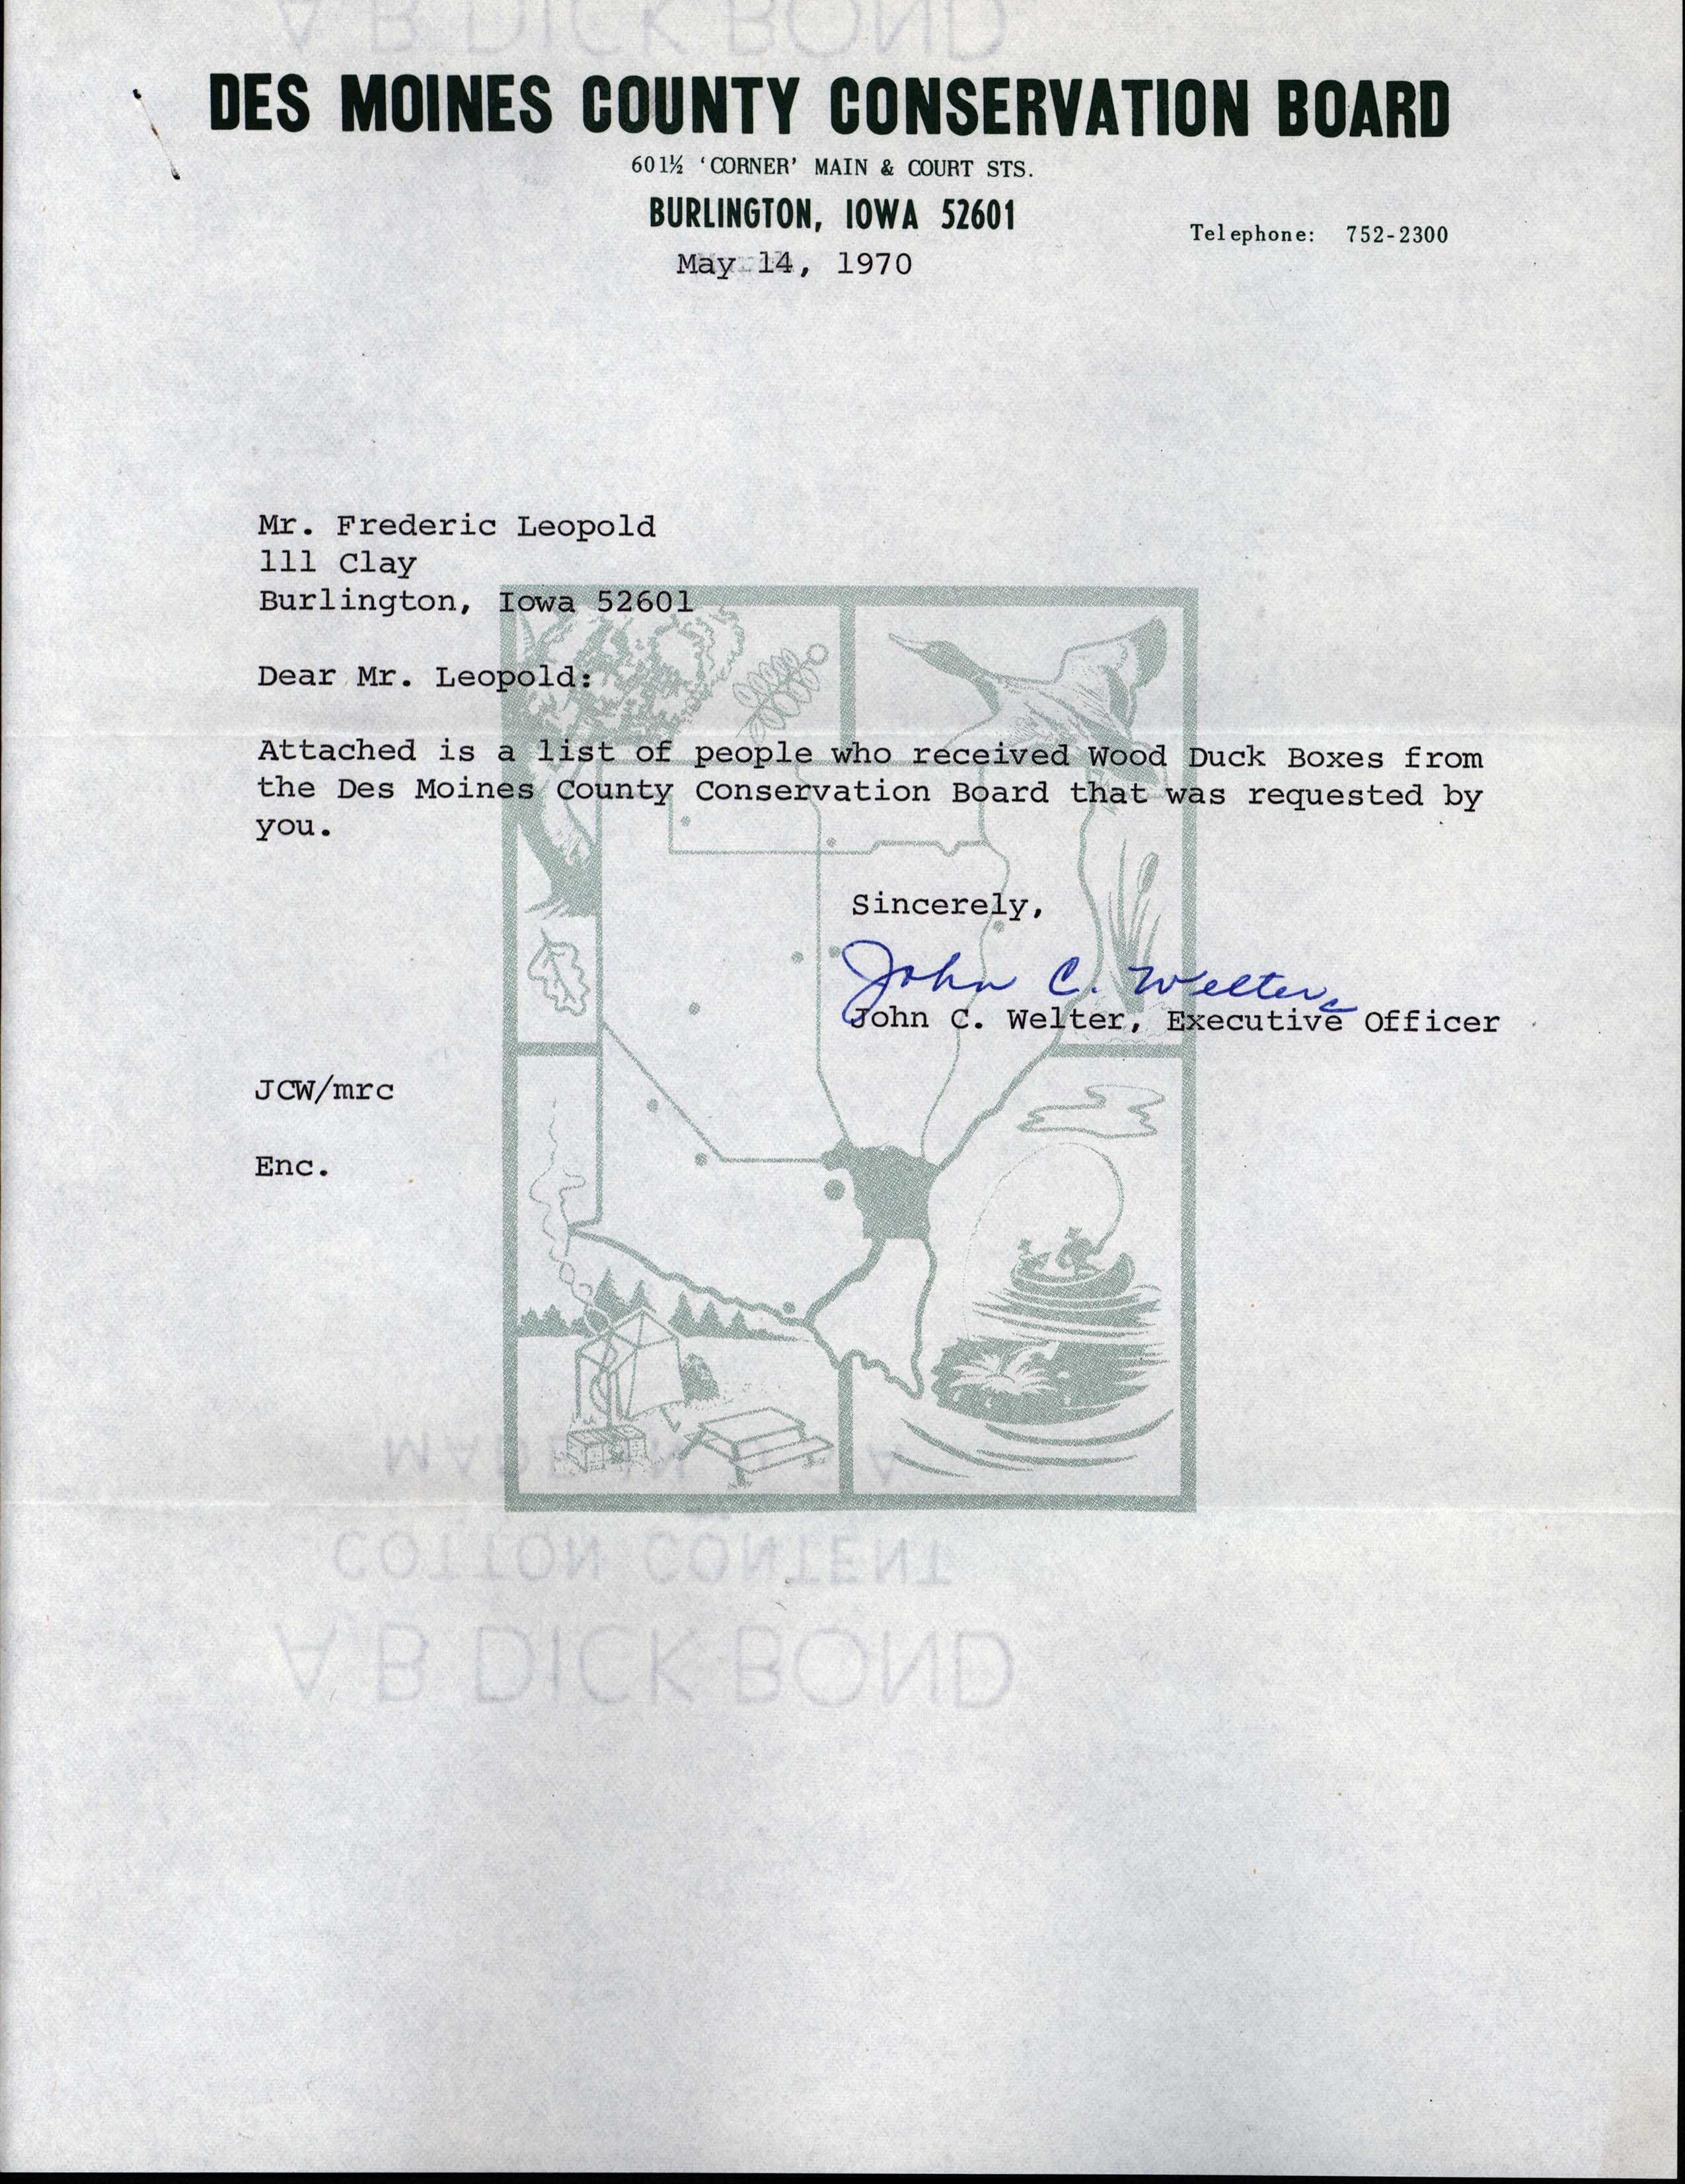 John C. Welter letter and attached list to Frederic Leopold regarding Wood Duck houses, May 14, 1970